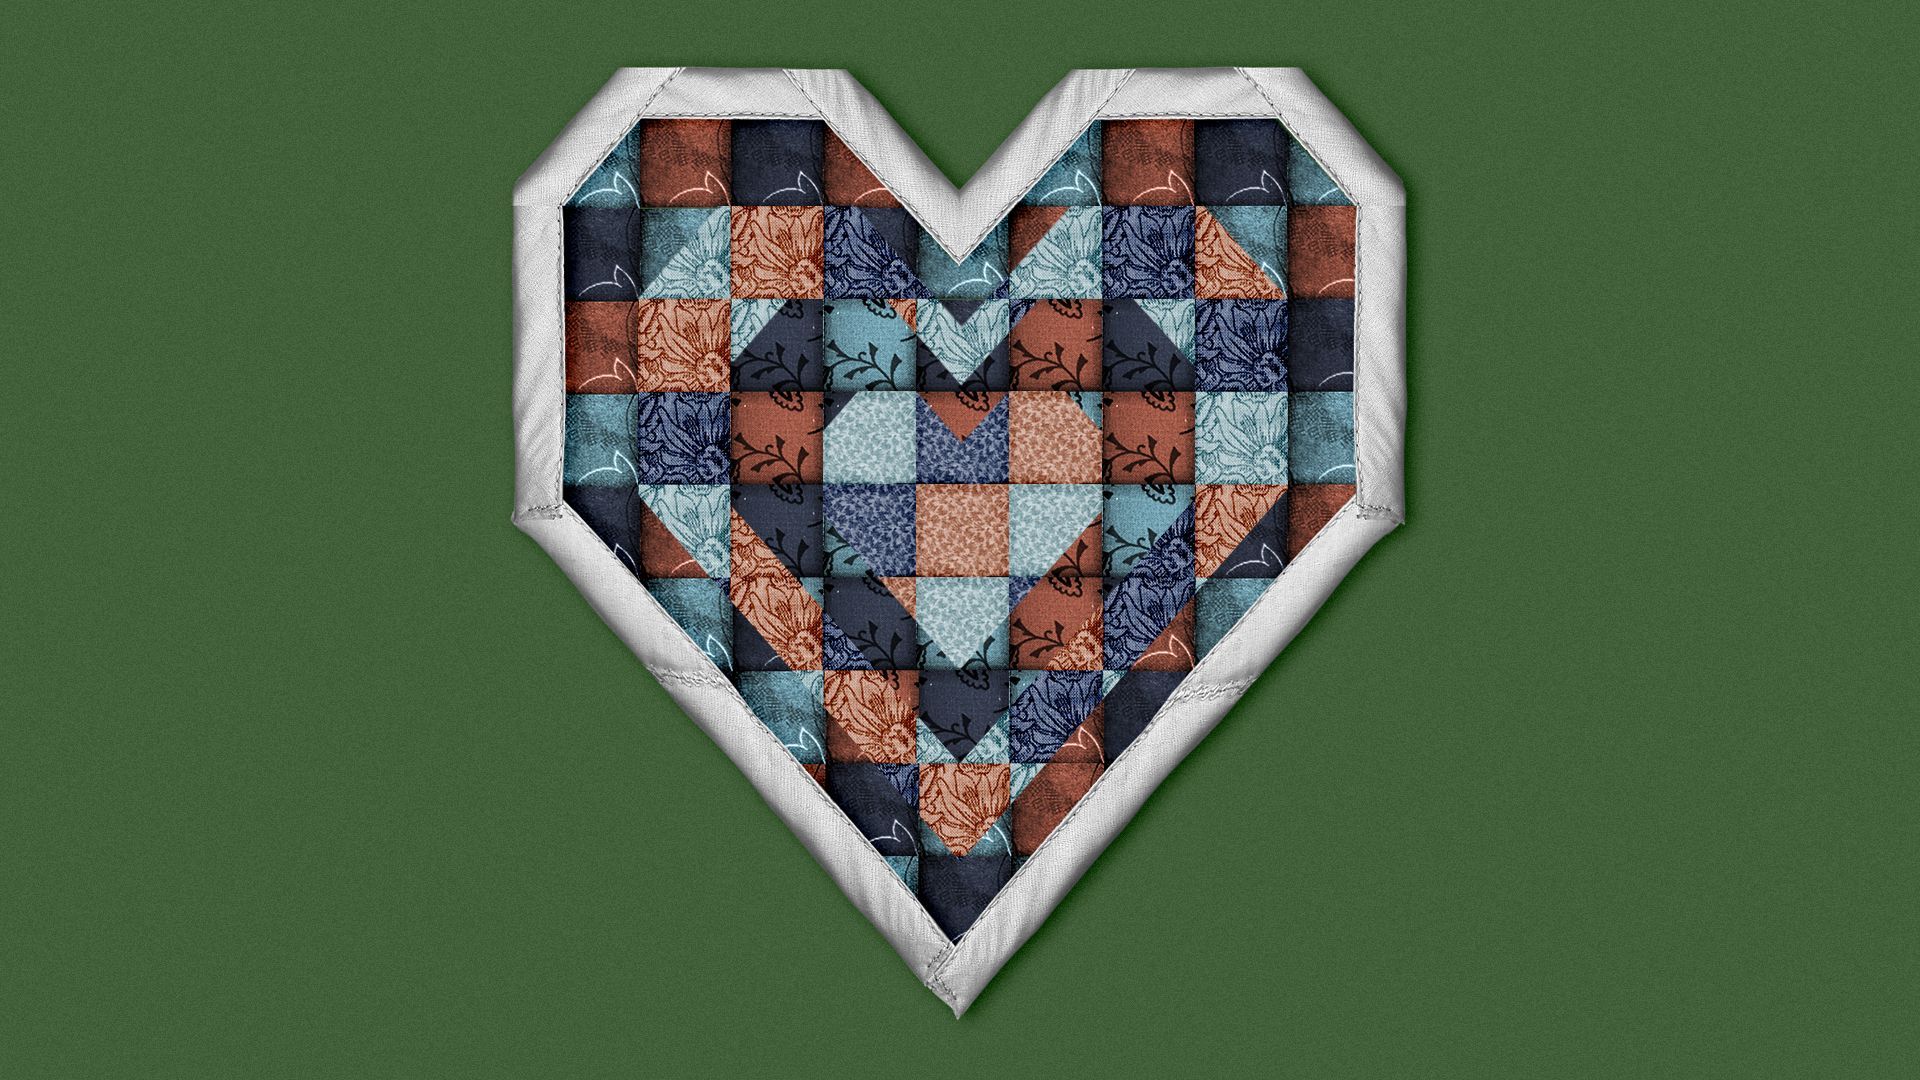 Illustration of a heart-shaped quilt.